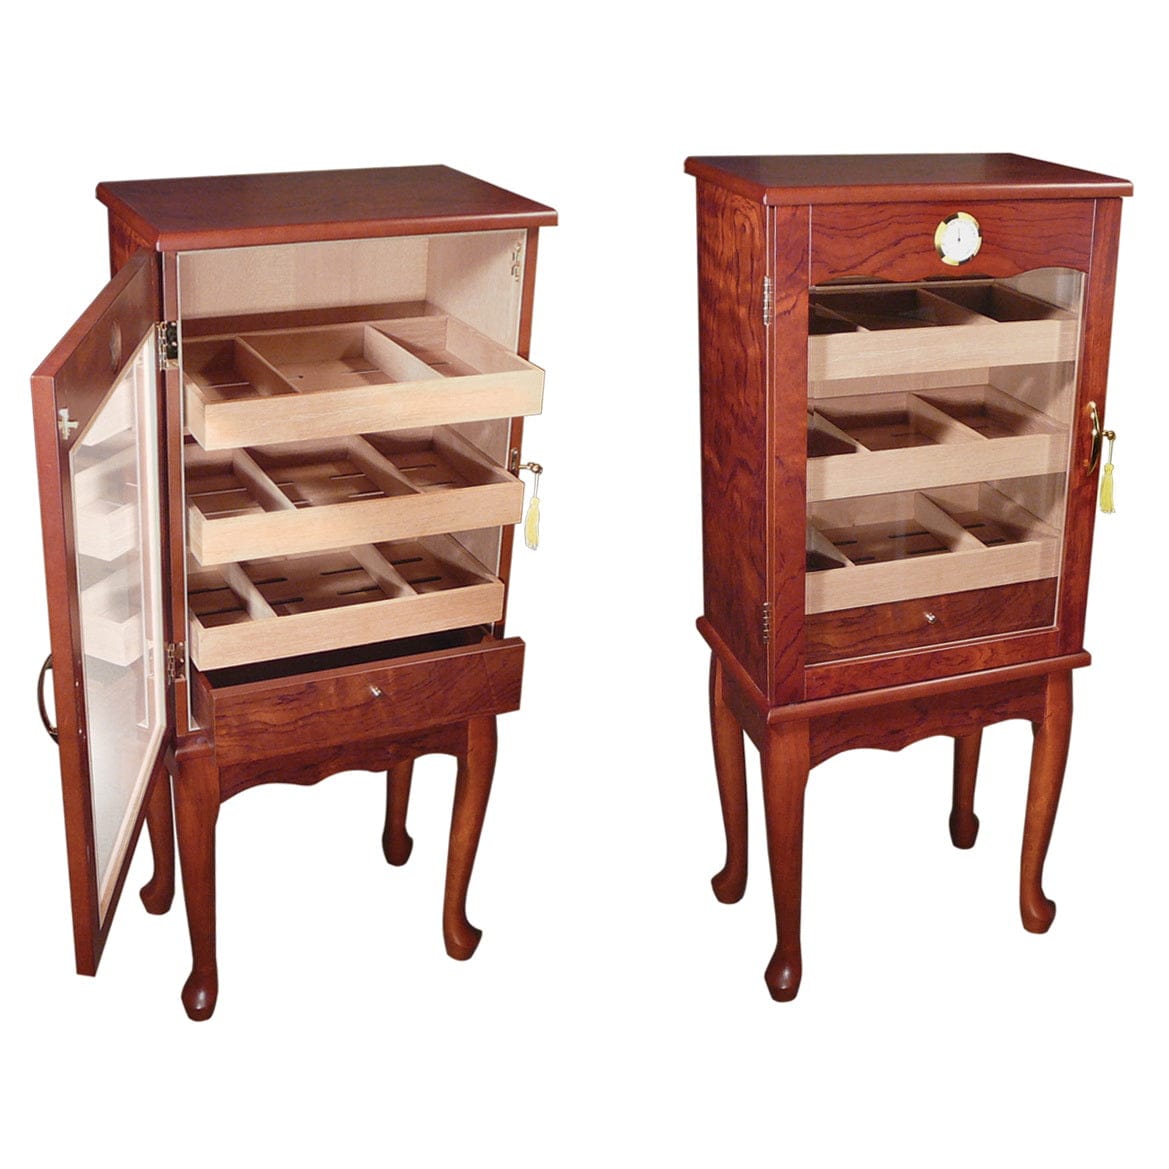 The Belmont Table Cigar Humidor BLMNT Cigar Humidors BLMNT Luxury Appliances Direct